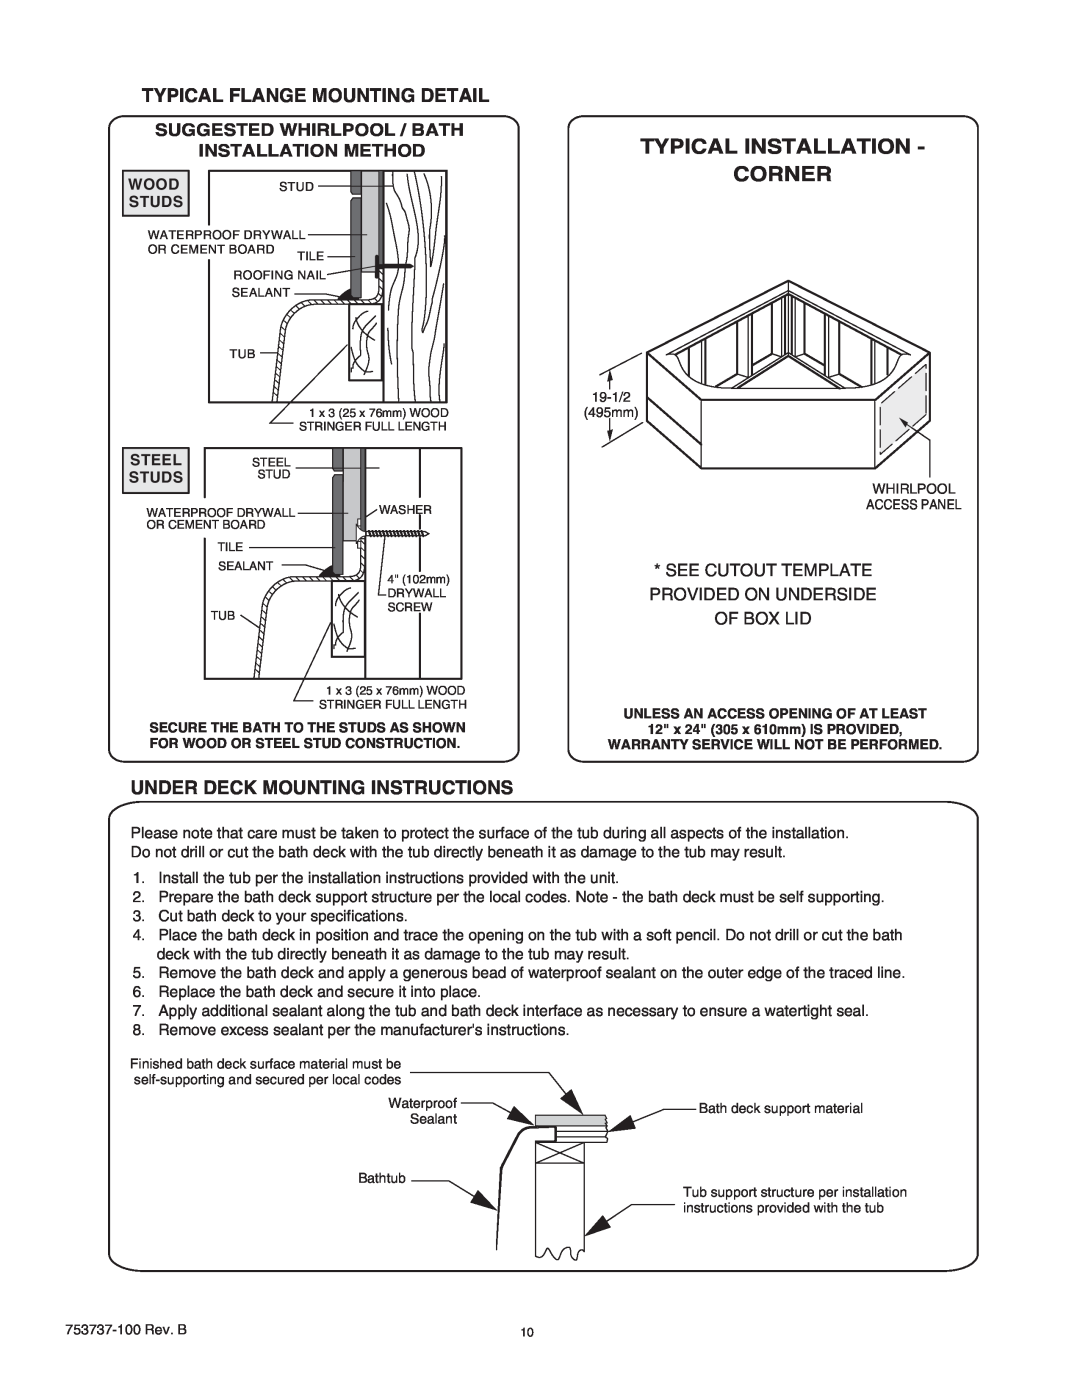 American Standard 2771VA Typical Installation Corner, Typical Flange Mounting Detail, Under Deck Mounting Instructions 